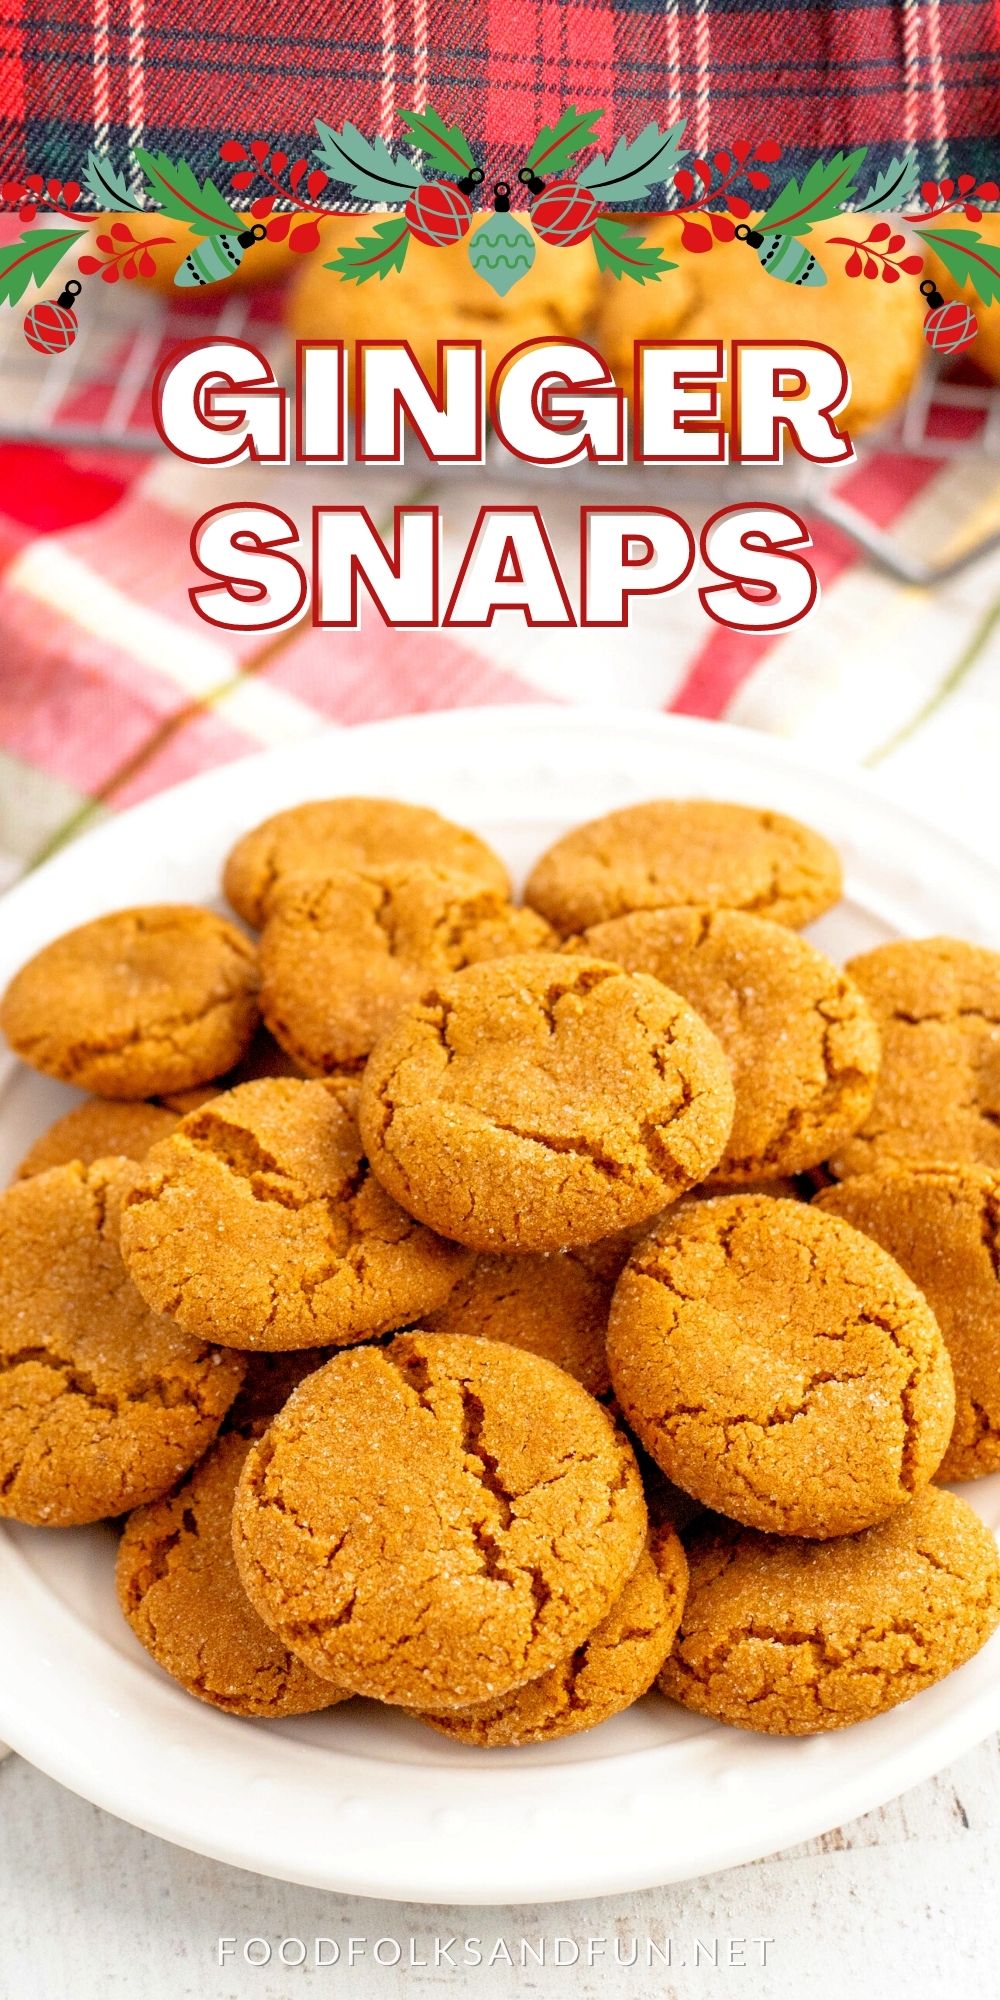 Whether you call them Gingersnaps, Ginger Snaps, Ginger Doodles, Ginger Biscuits, or Ginger Nut, this Gingersnap Cookie Recipe is the BEST! They’re great any time of the year or especially during Thanksgiving and Christmas time!  via @foodfolksandfun